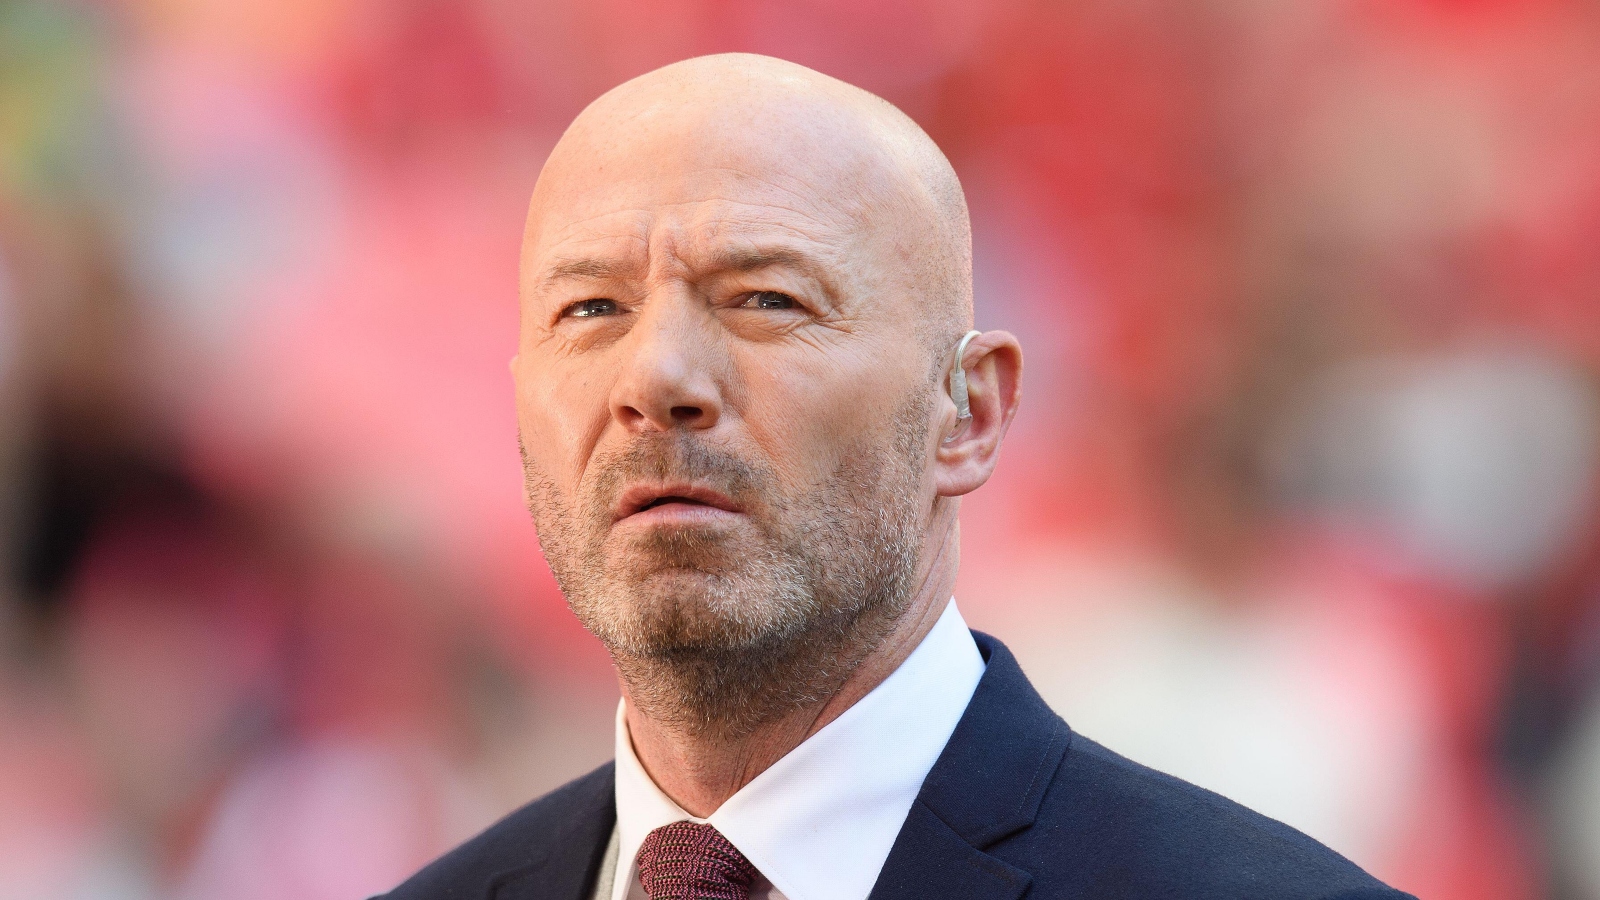 Alan Shearer during a BBC broadcast